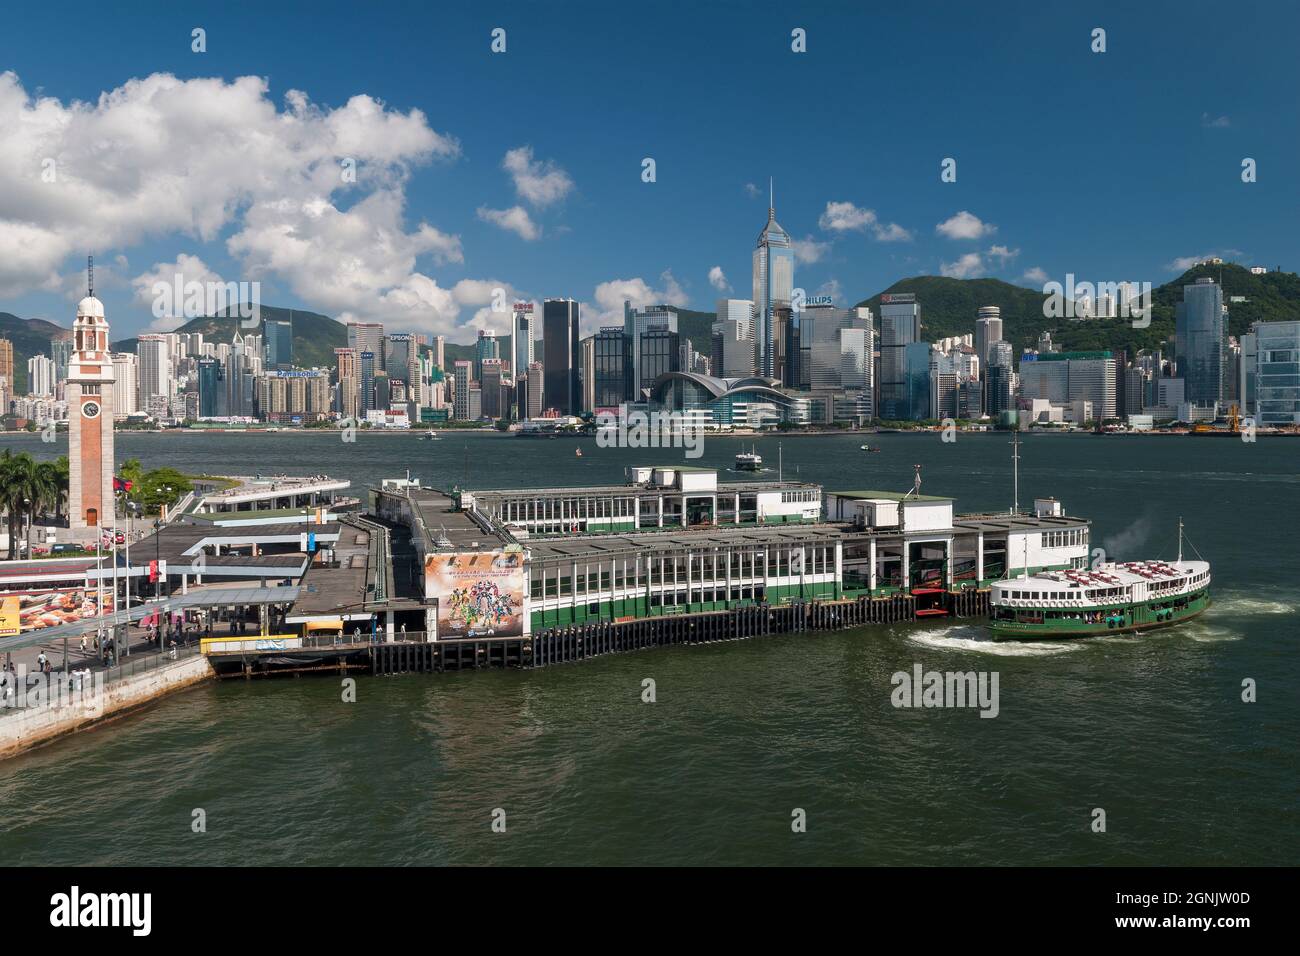 A Star Ferry arrives at Tsim Sha Tsui pier in Kowloon, with Wan Chai and Causeway Bay, Hong Kong Island, visible across Victoria Harbour Stock Photo